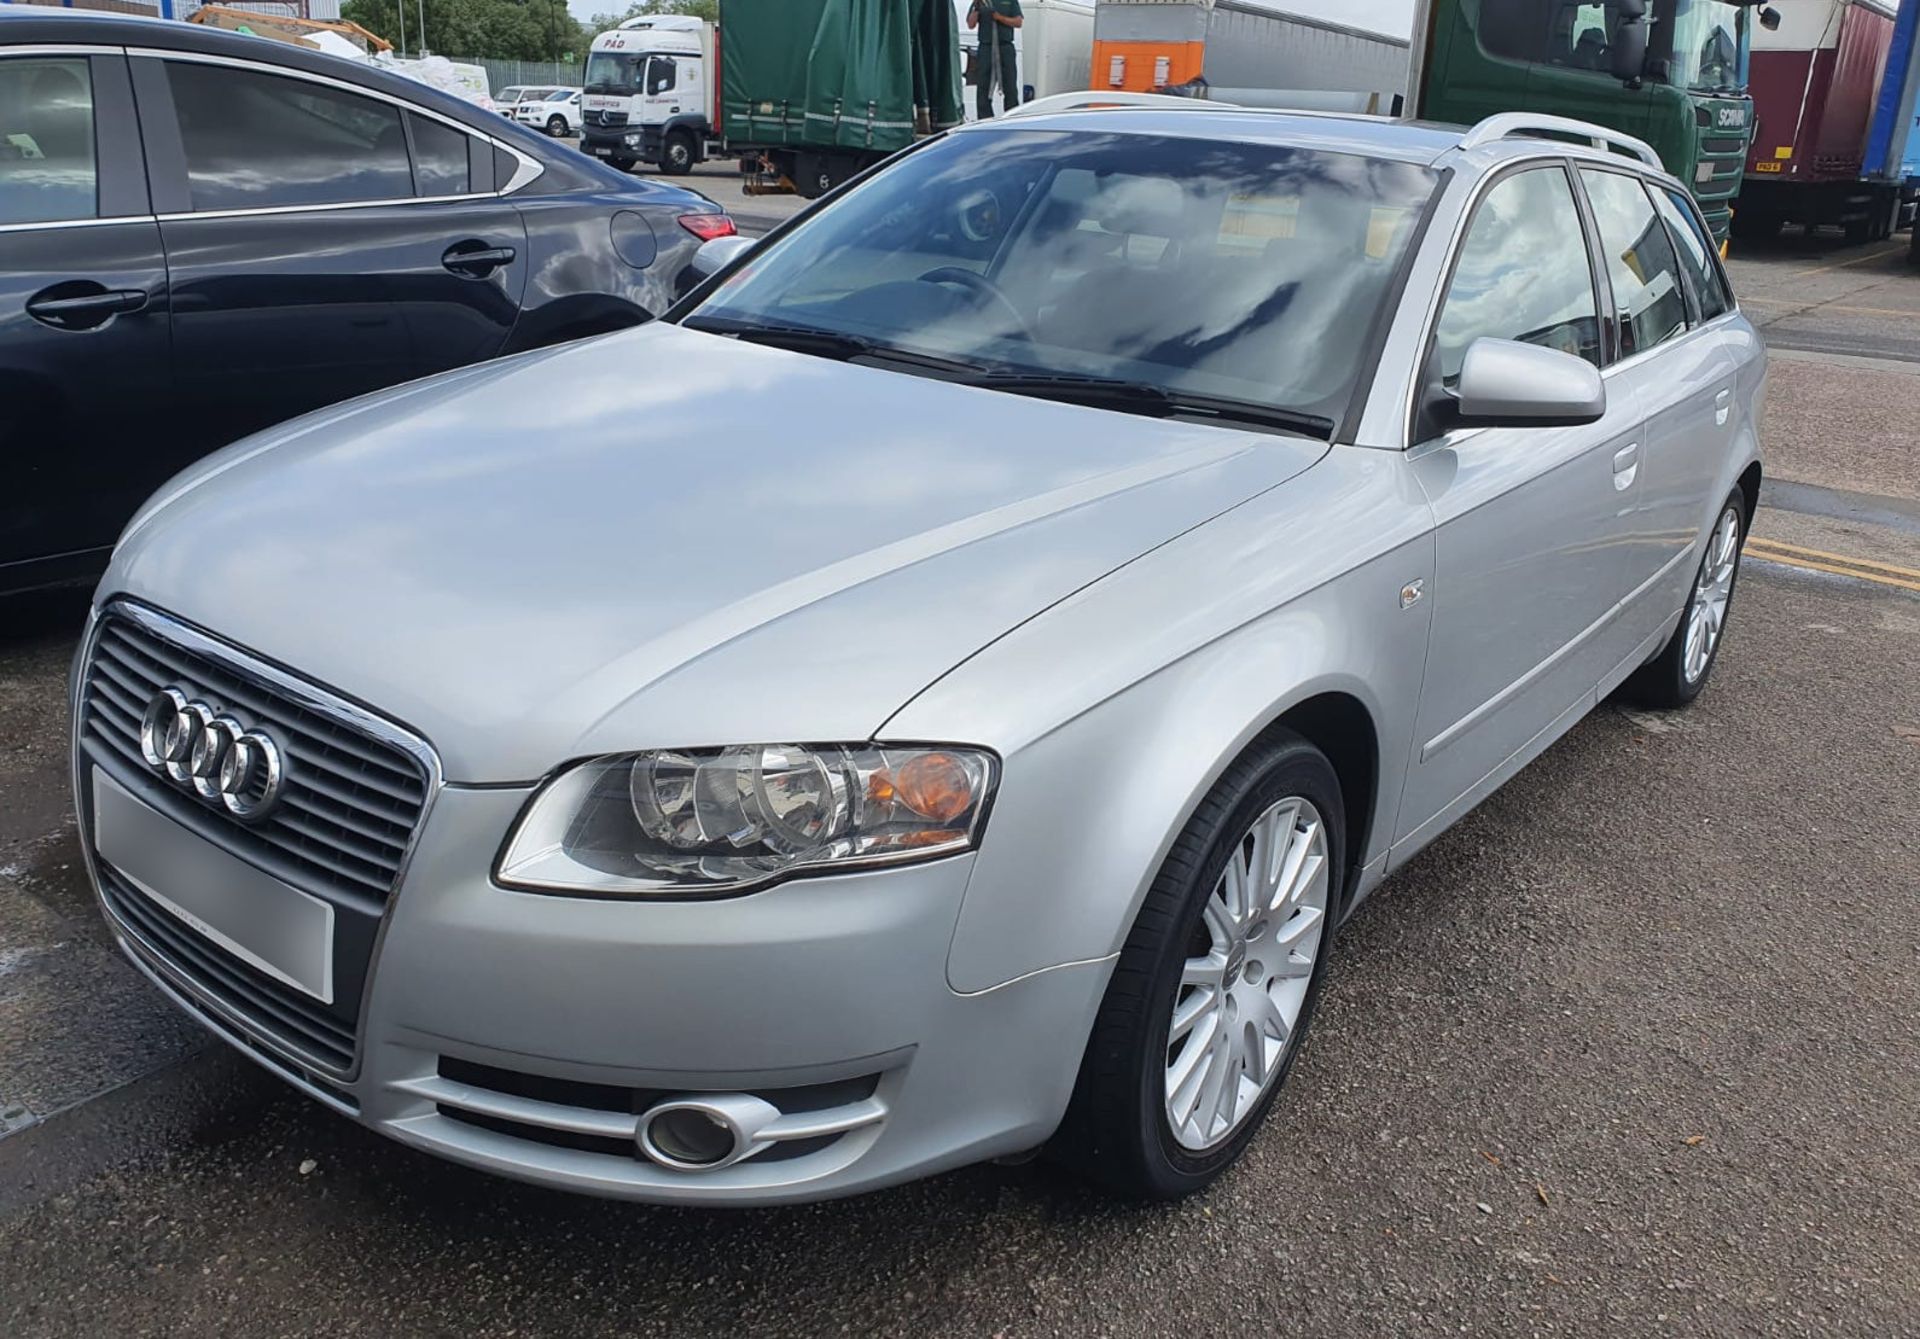 2007 Audi A4 2.0 TDI 5dr Estate in Silver - CLTBC - NO VAT ON THE HAMMER -  - Location: Altrincham - Image 48 of 49